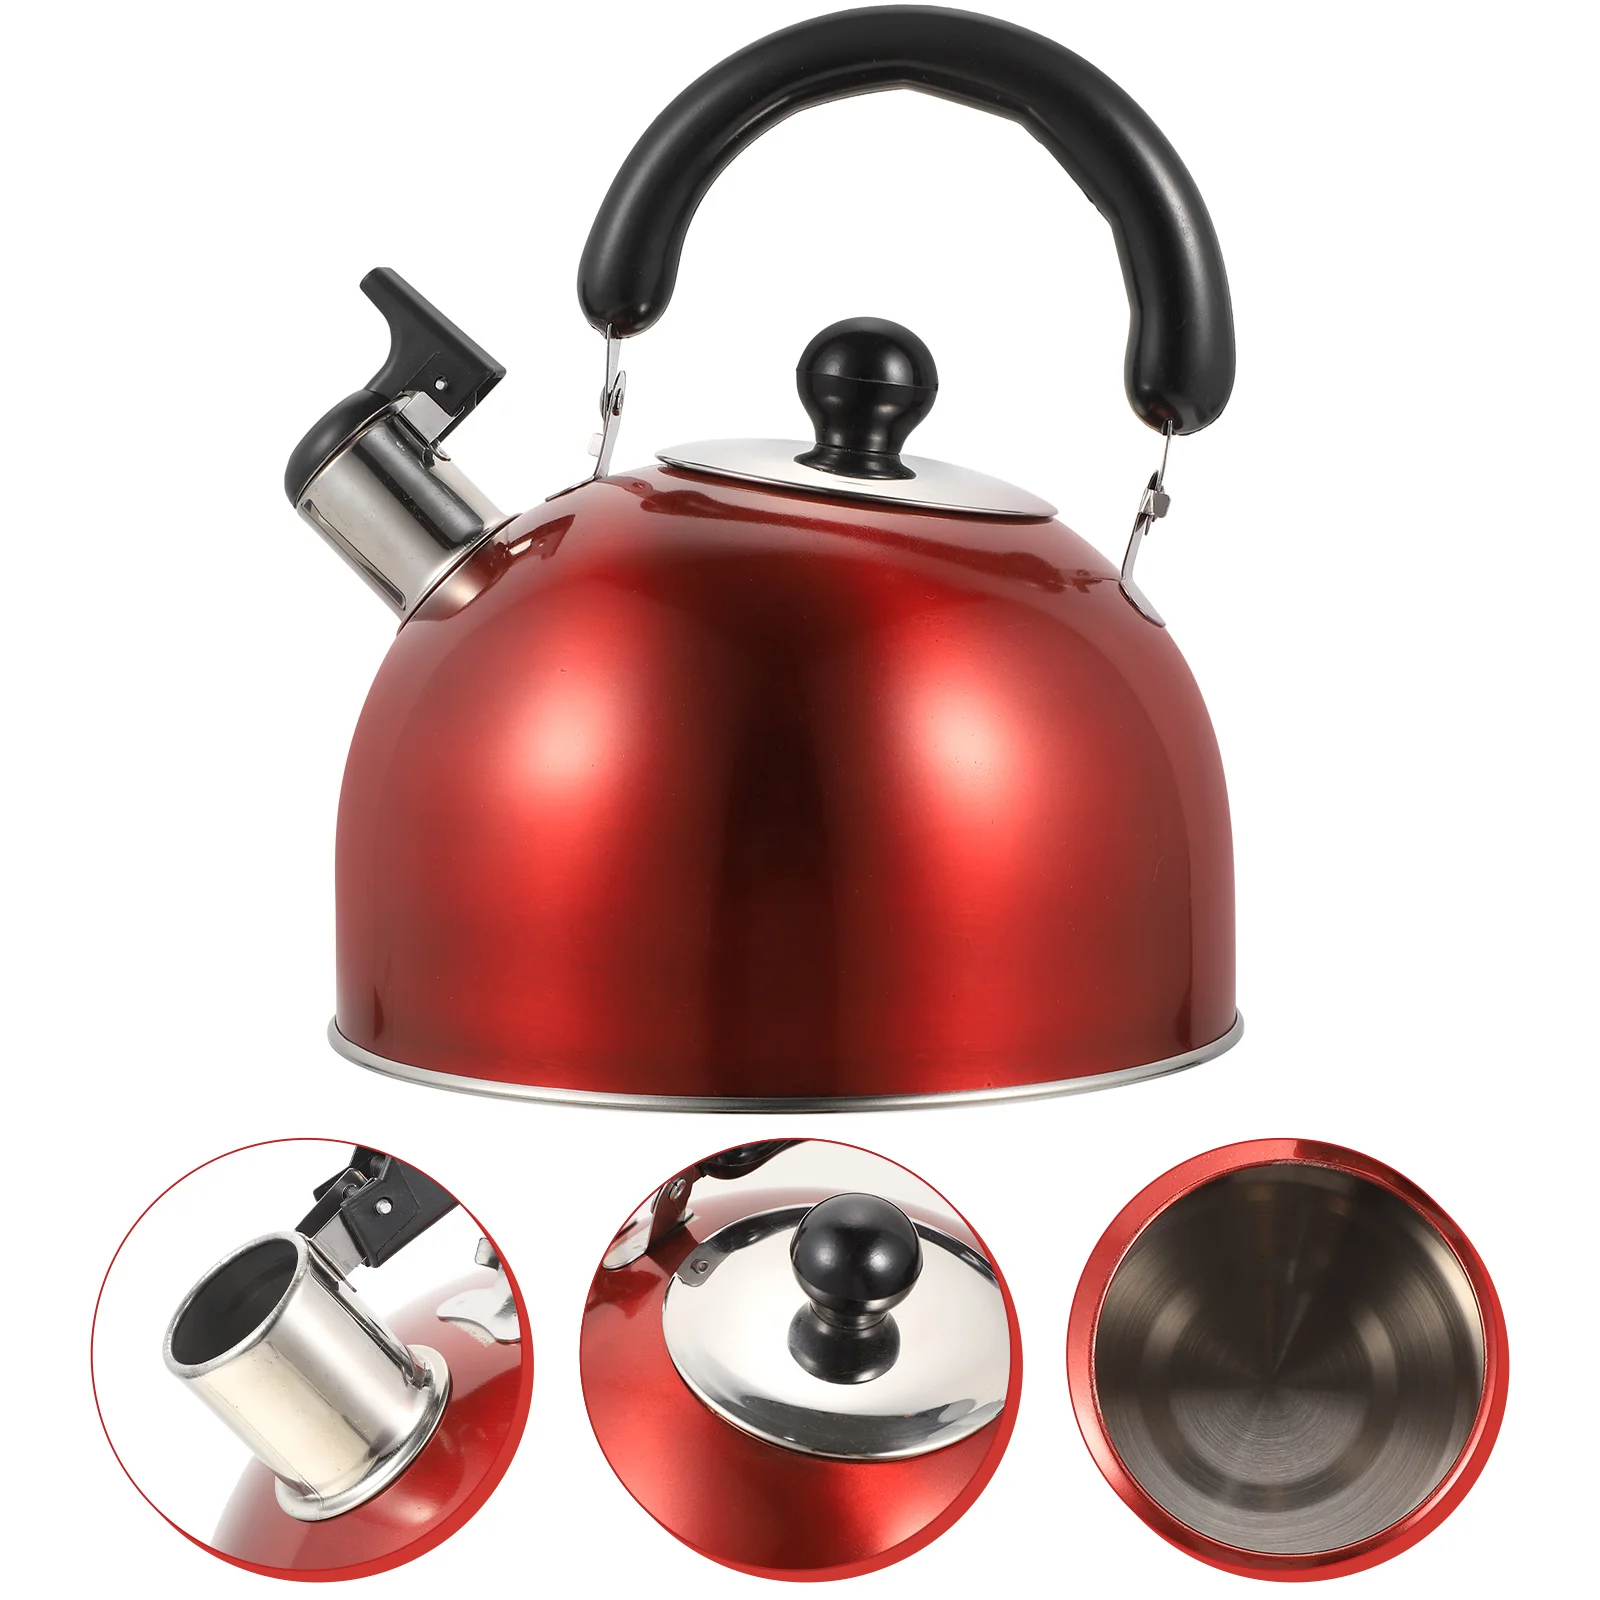 

Kettle Tea Whistling Water Stovetop Teapot Pot Stainless Steel Gas Coffee Induction Cooker Hot Stove Electric Boiling Teakettle